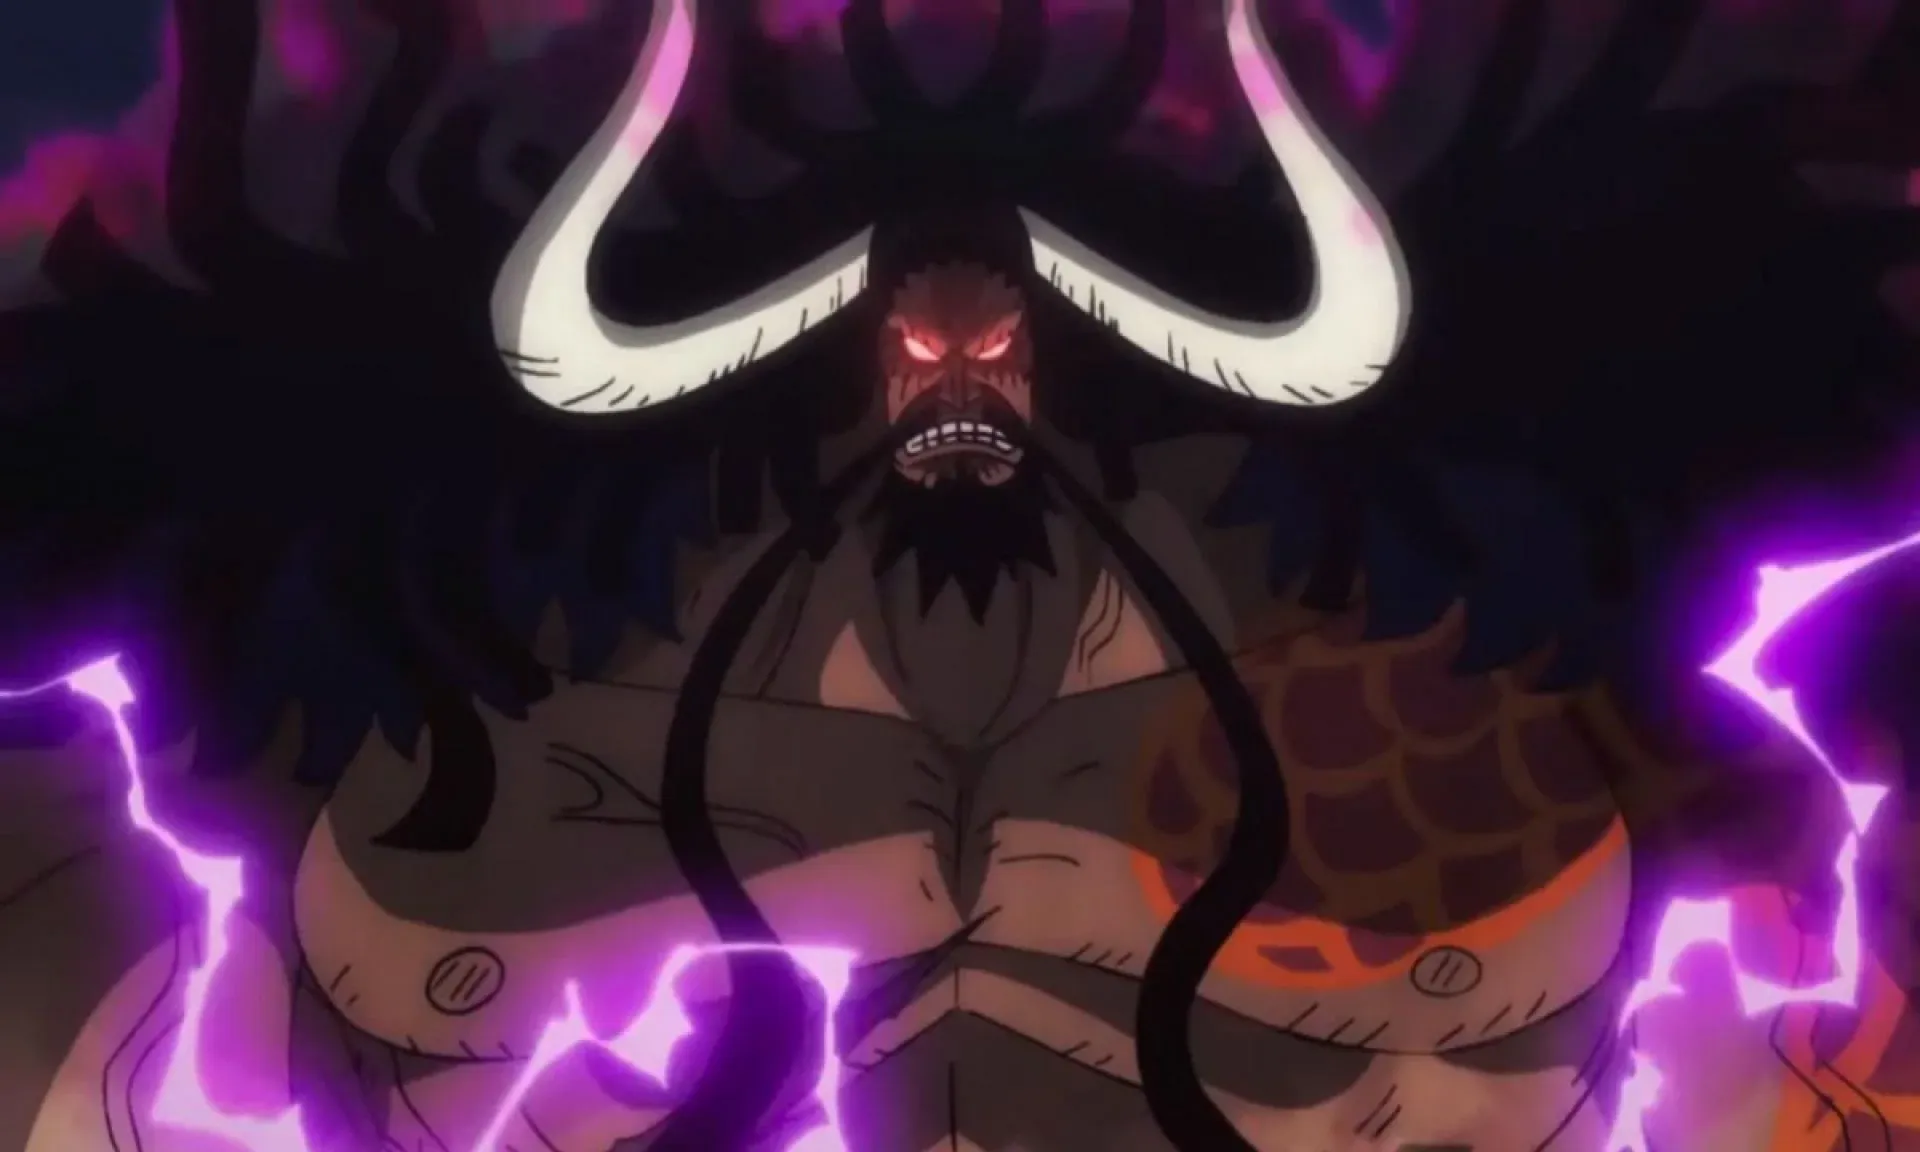 Kaido from One Piece is ready to attack (Toei)